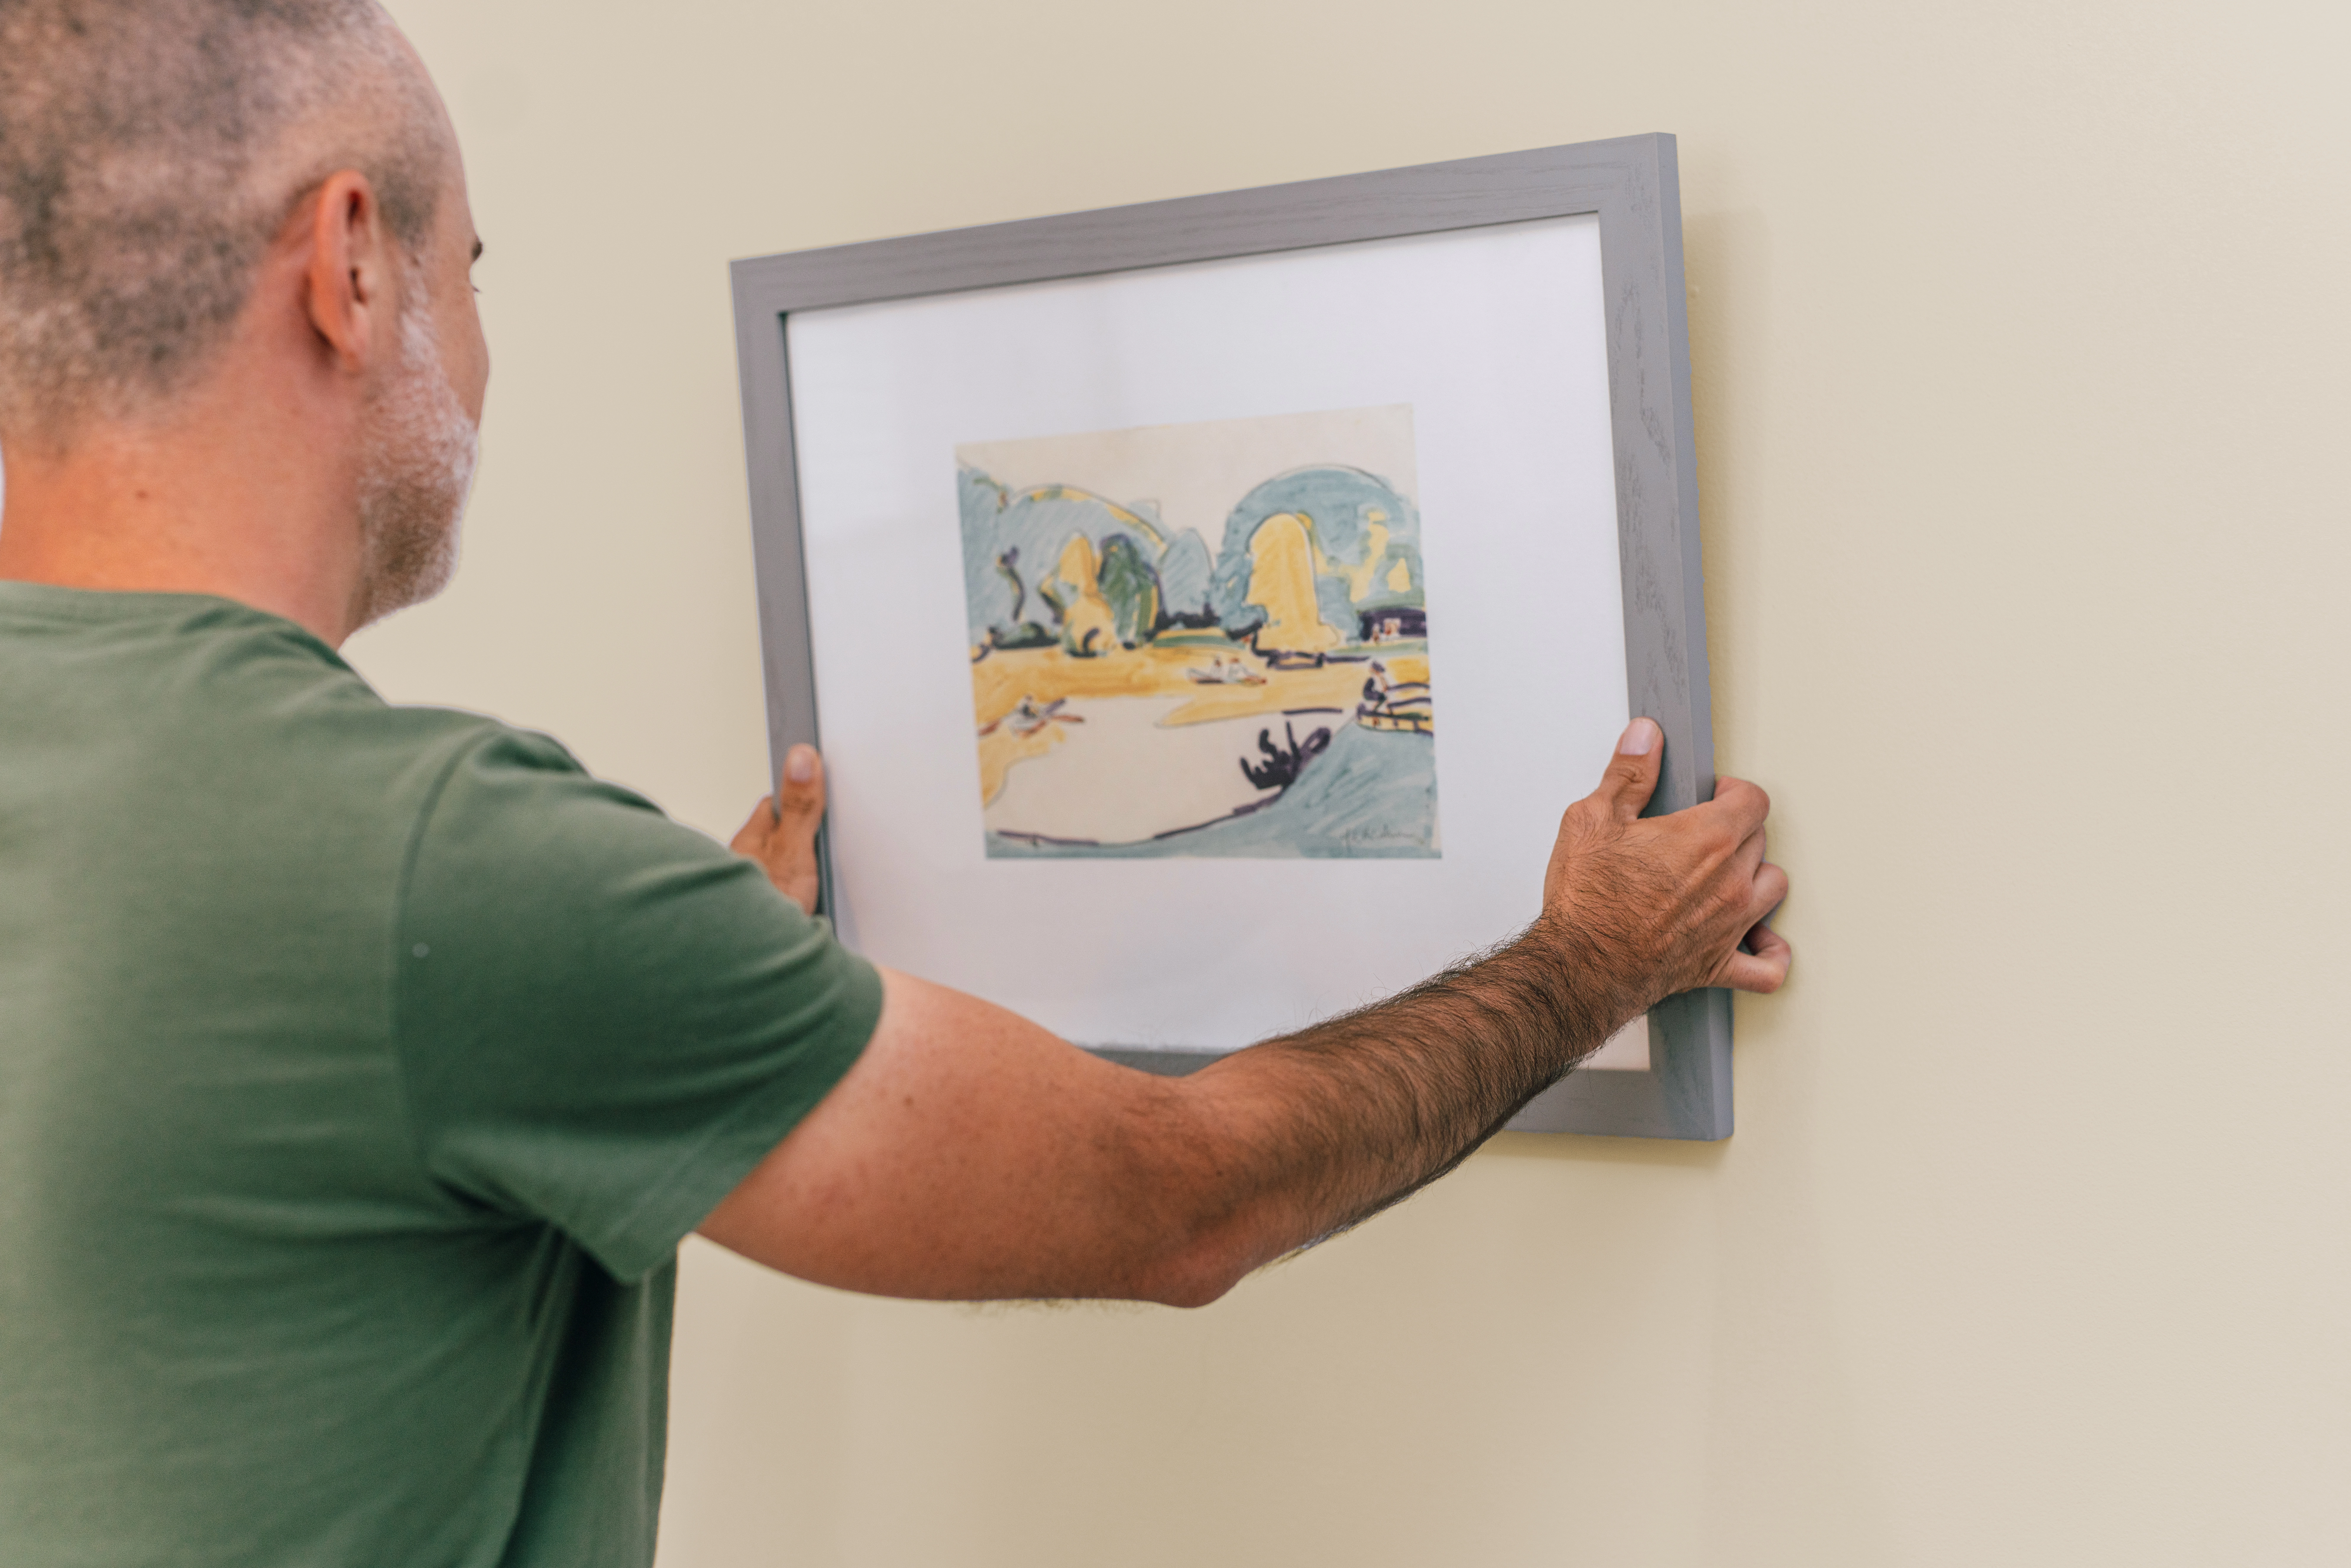 Behind shot of man holding up a gray framed painting and positioning it to hang on a wall.